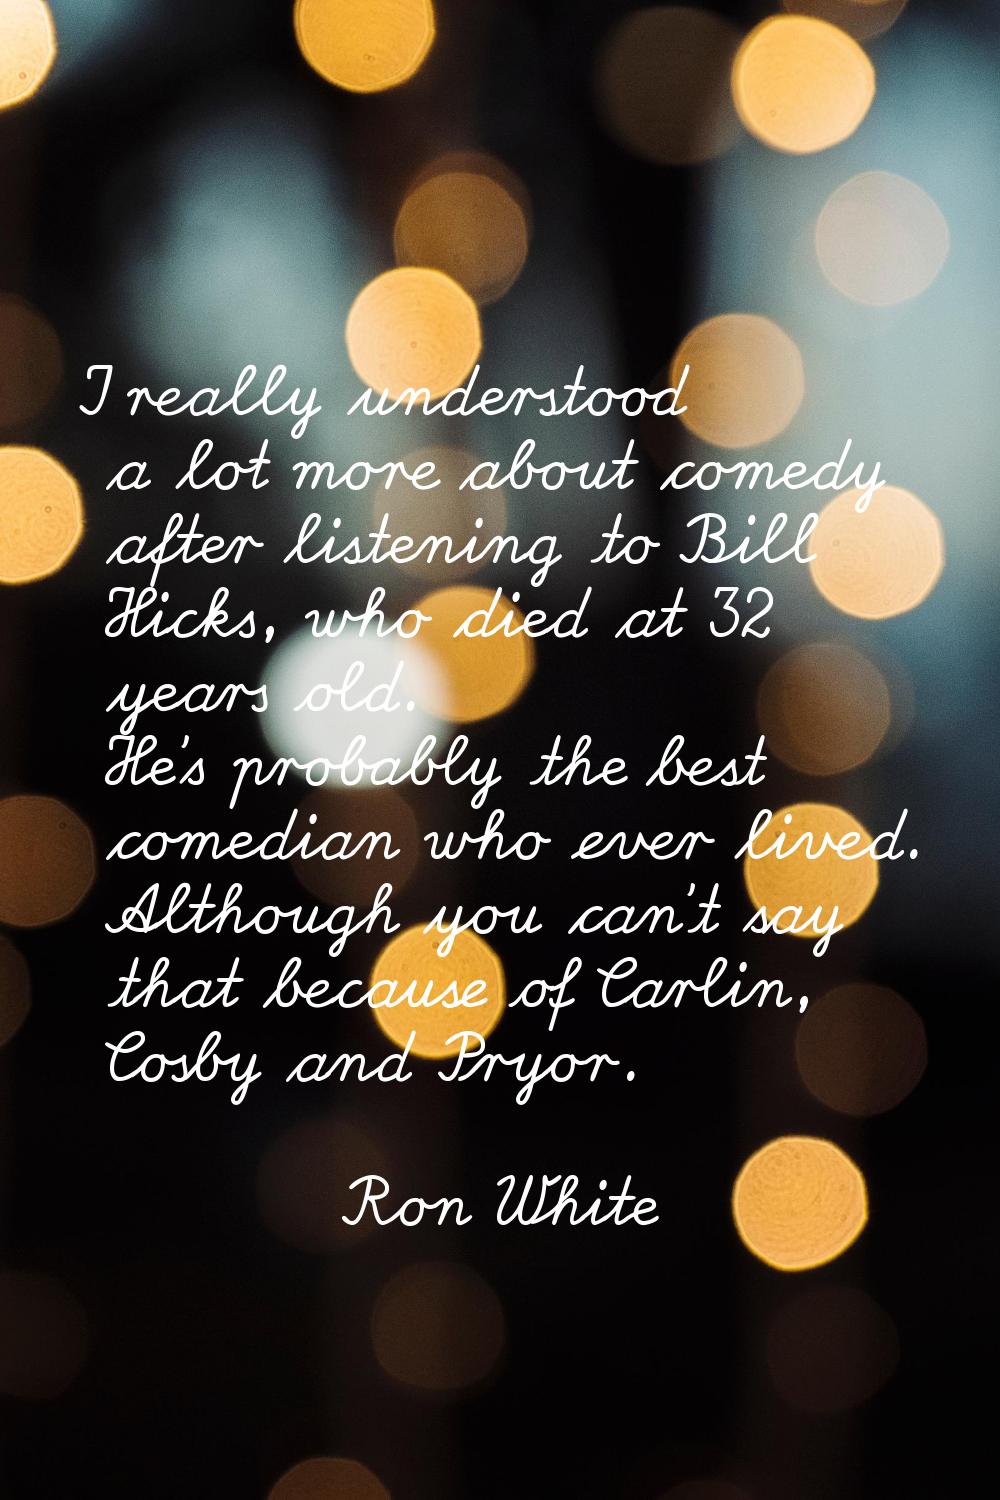 I really understood a lot more about comedy after listening to Bill Hicks, who died at 32 years old